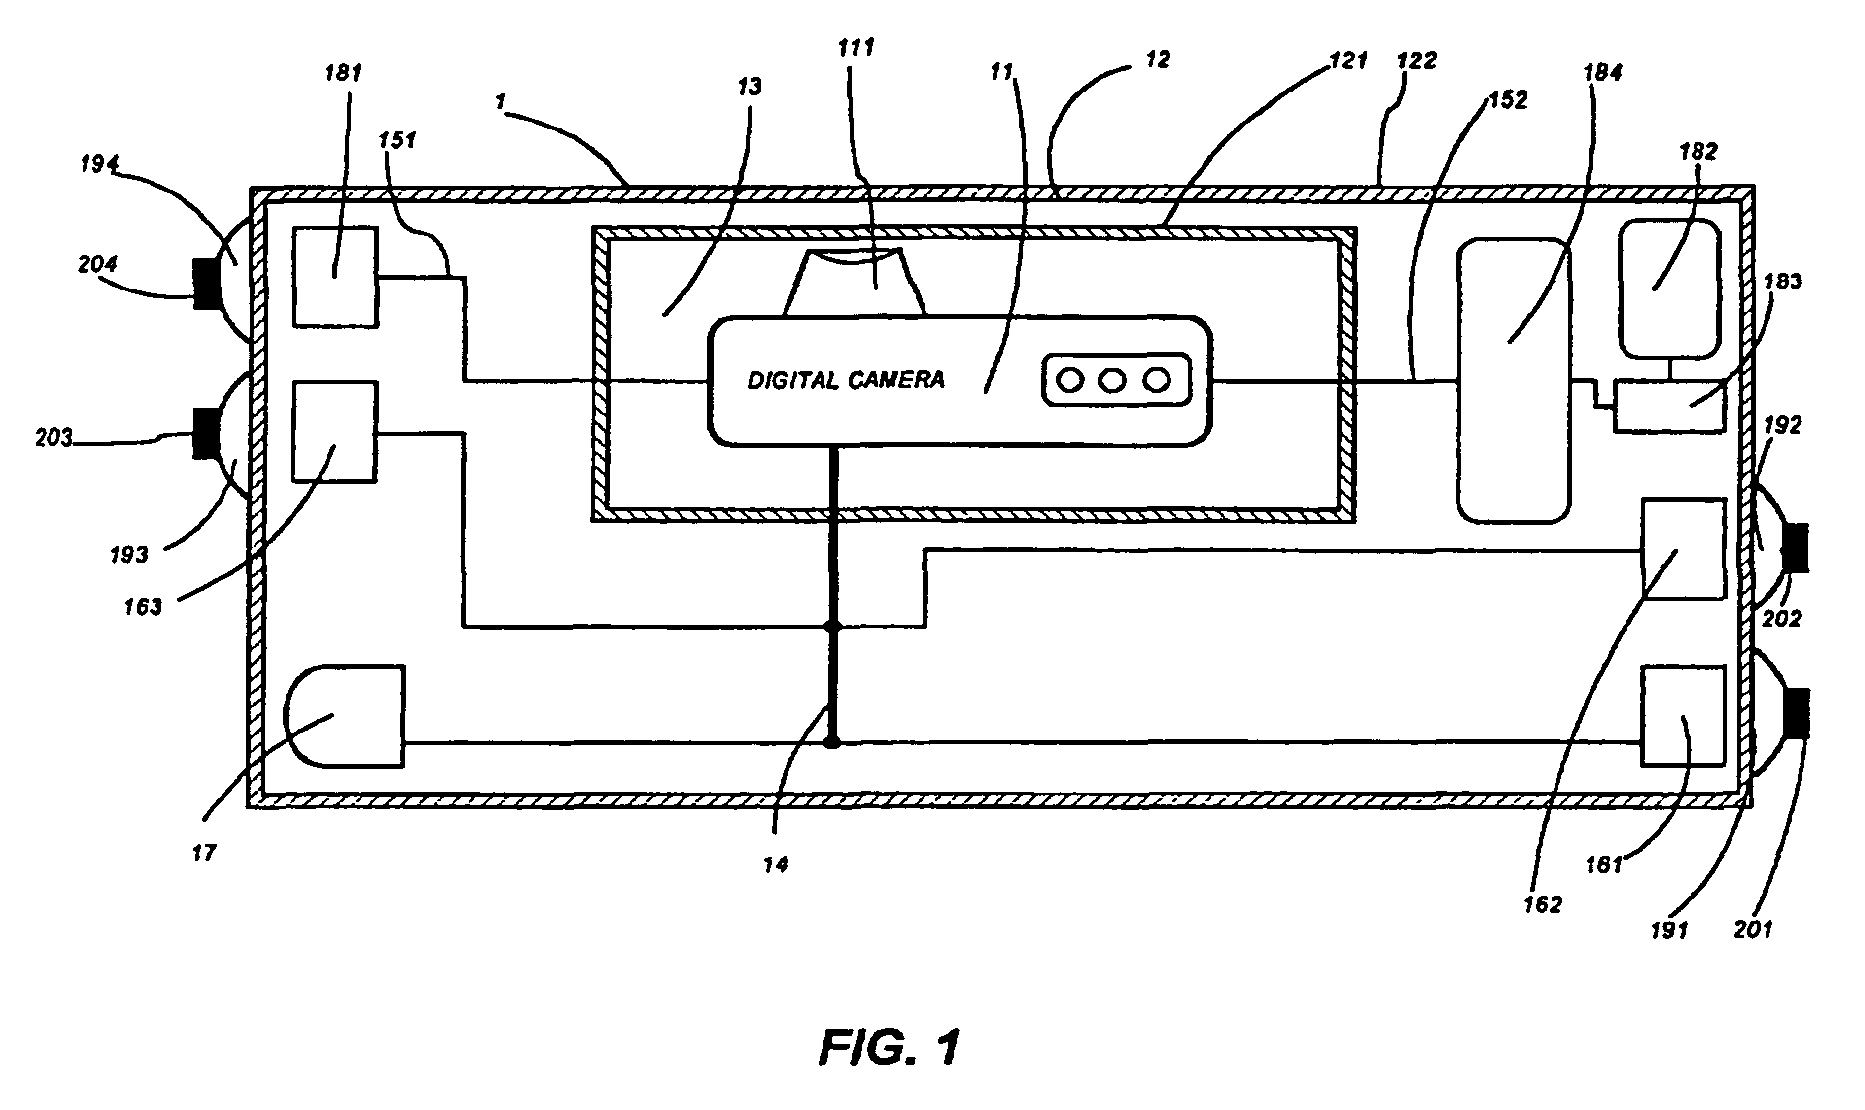 Sealed, waterproof digital electronic camera system and method of fabricating same